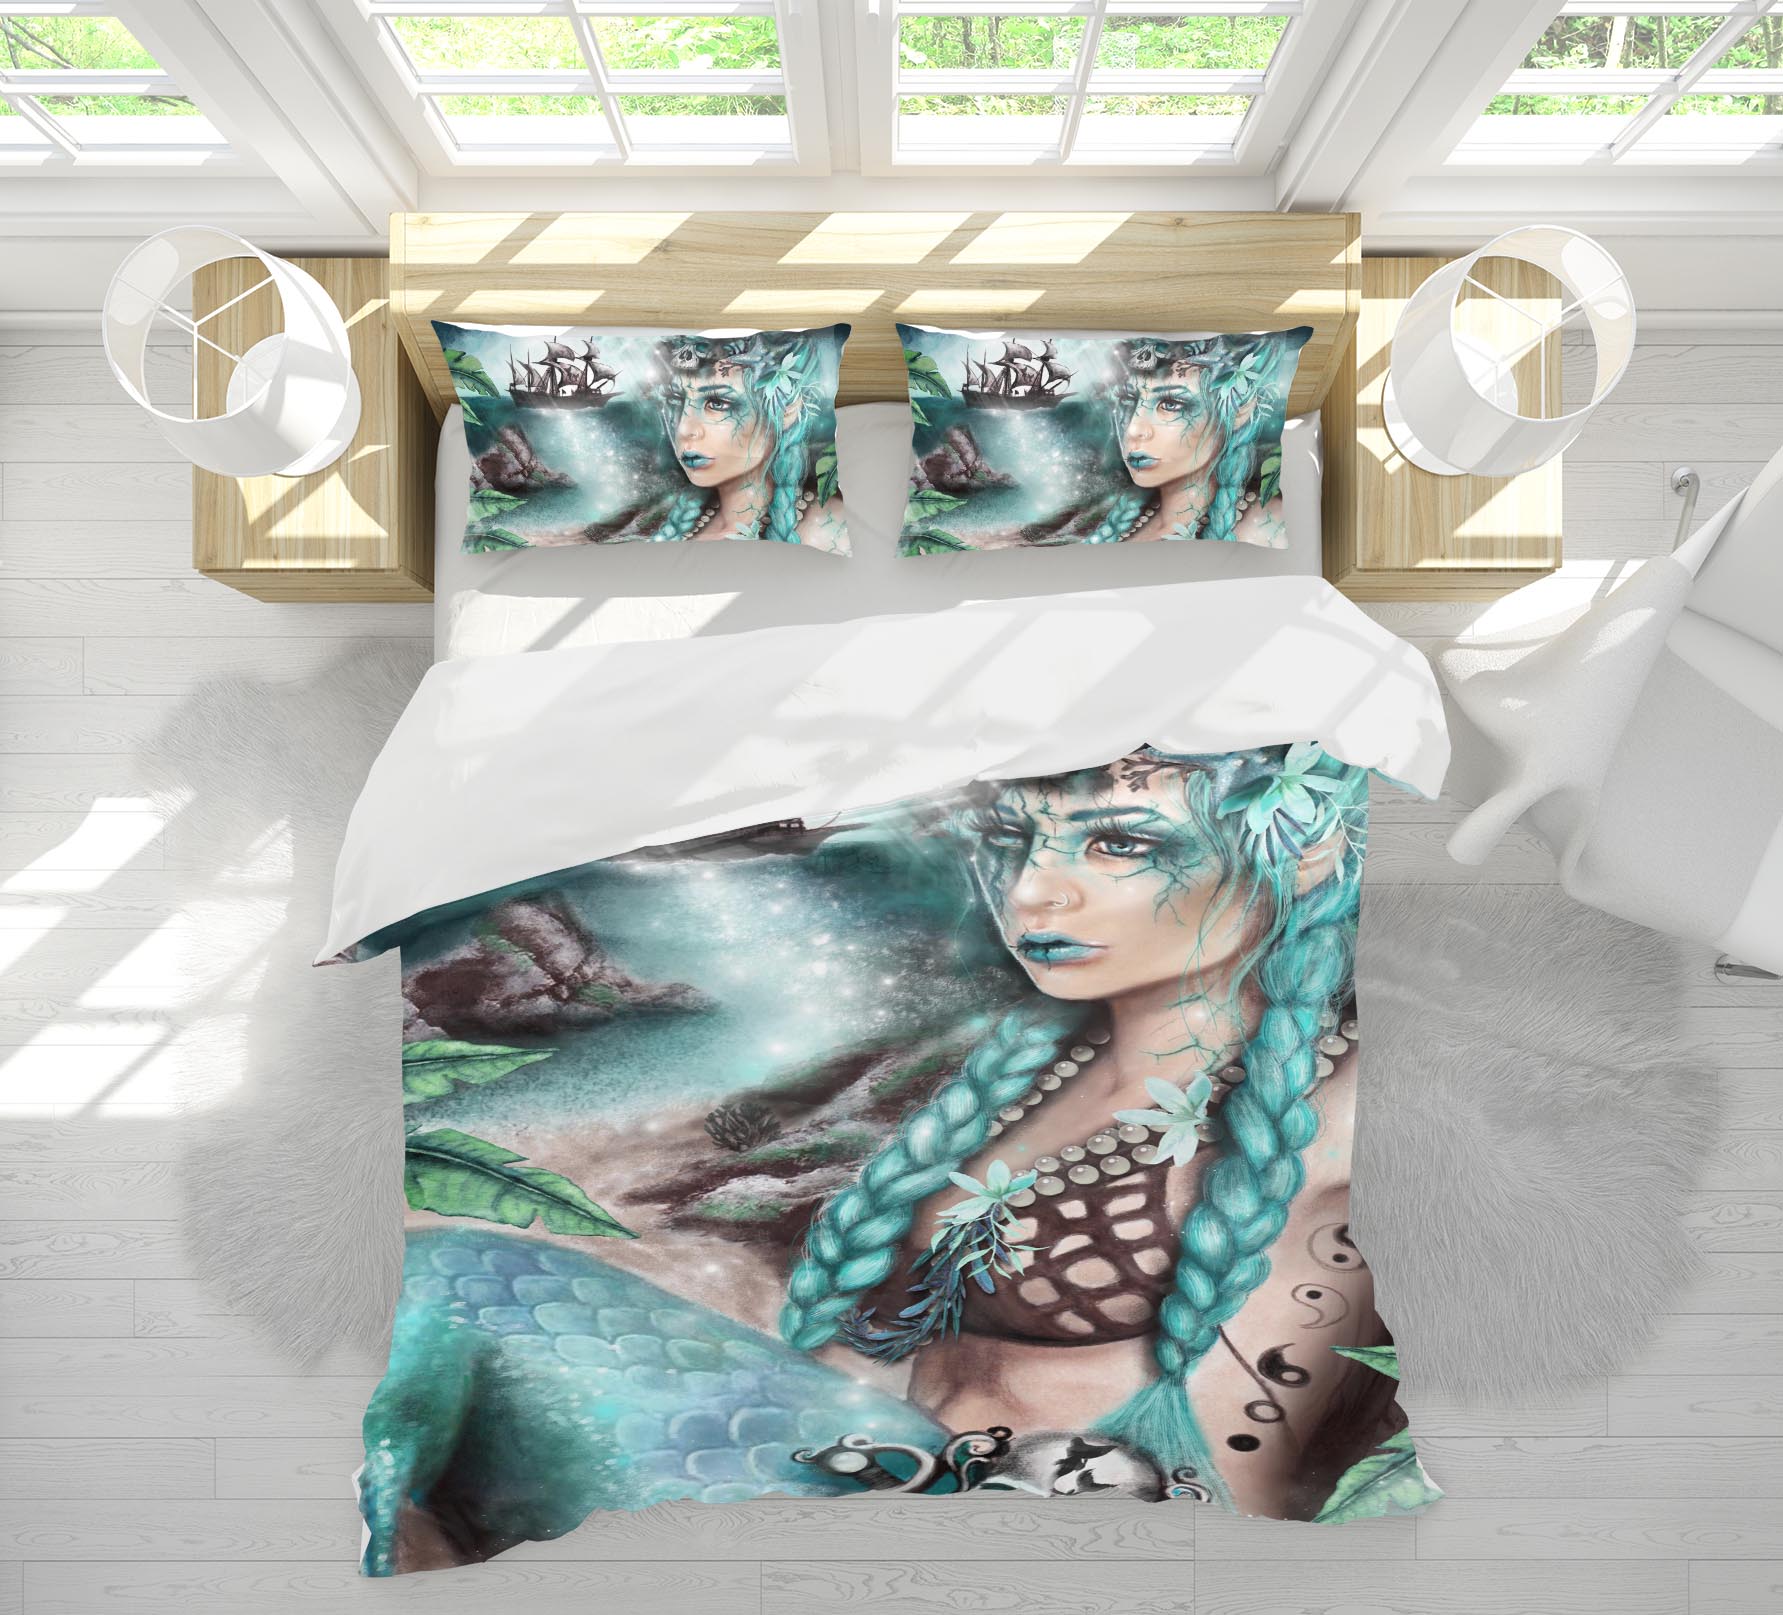 3D Mermaid Woman 8578 Sheena Pike Bedding Bed Pillowcases Quilt Cover Duvet Cover